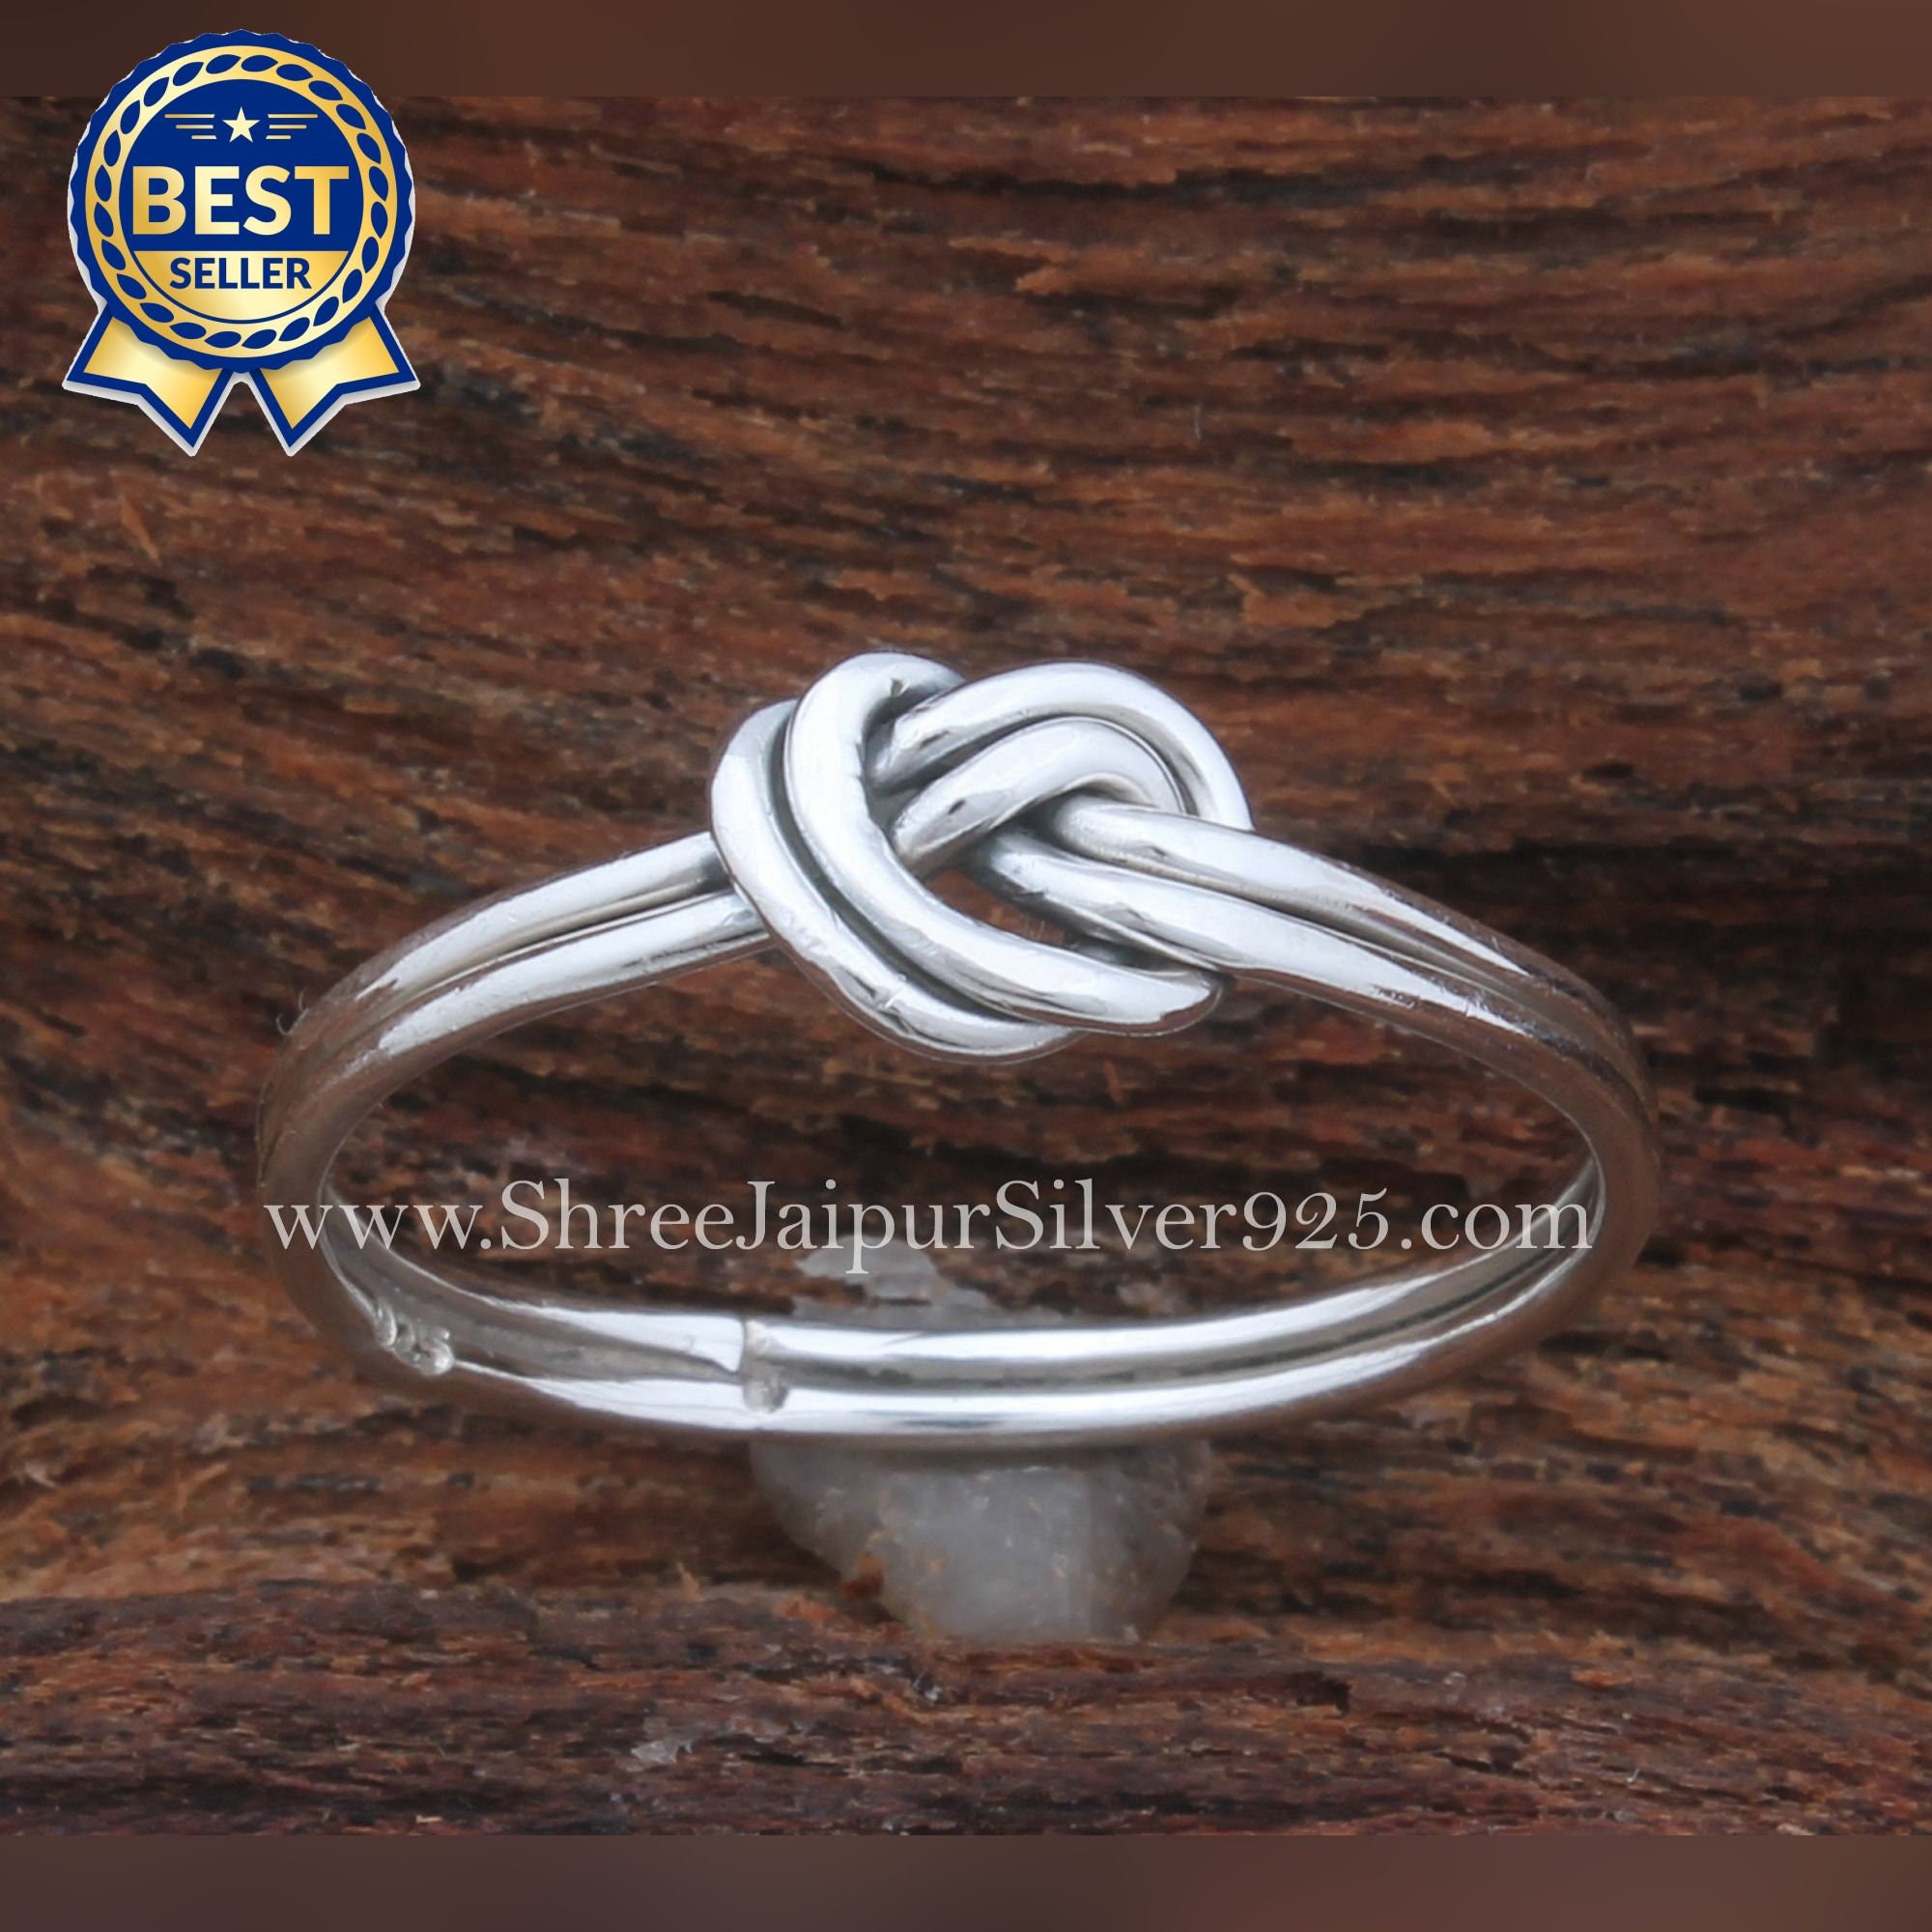  Personalize Dainty Best Friends Irish Celtic Love Knots BFF  Infinity Heart Promise Ring 1MM Band For Teen Women Oxidized .925 Sterling  Silver Customizable: Toe Rings: Clothing, Shoes & Jewelry